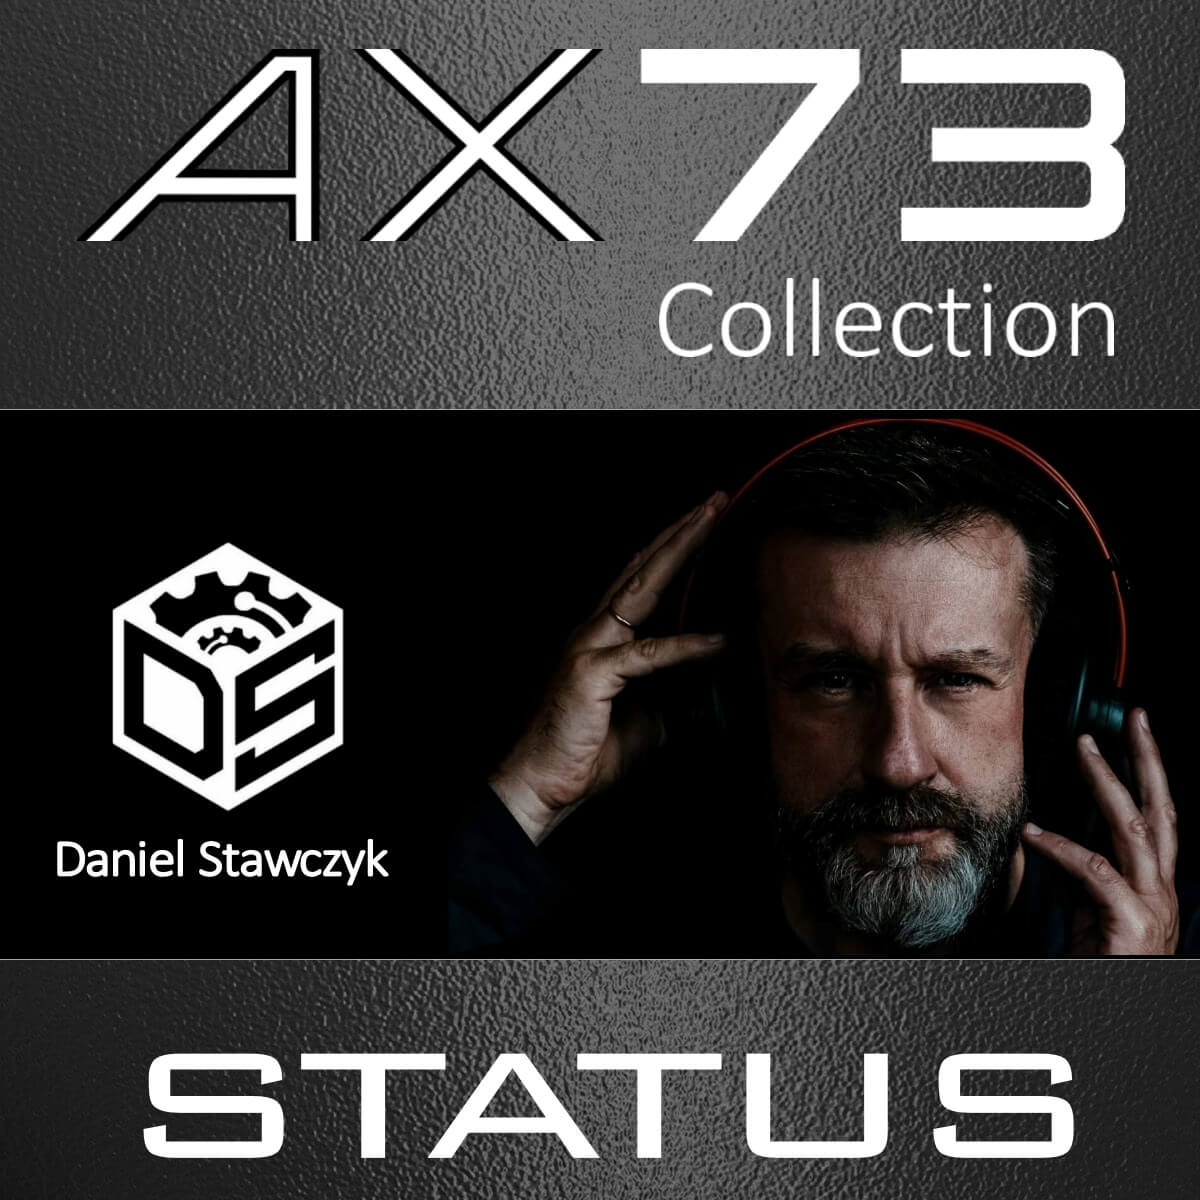 Elevate your sound with the AX73 Status Collection! 🎶 Unlock 100 premium synth presets crafted by the renowned designer Daniel Stawczyk of Status. Upgrade your music production game for only $19.00! #MusicMastery
 Product -> martinic.evyy.net/c/5396608/8388…